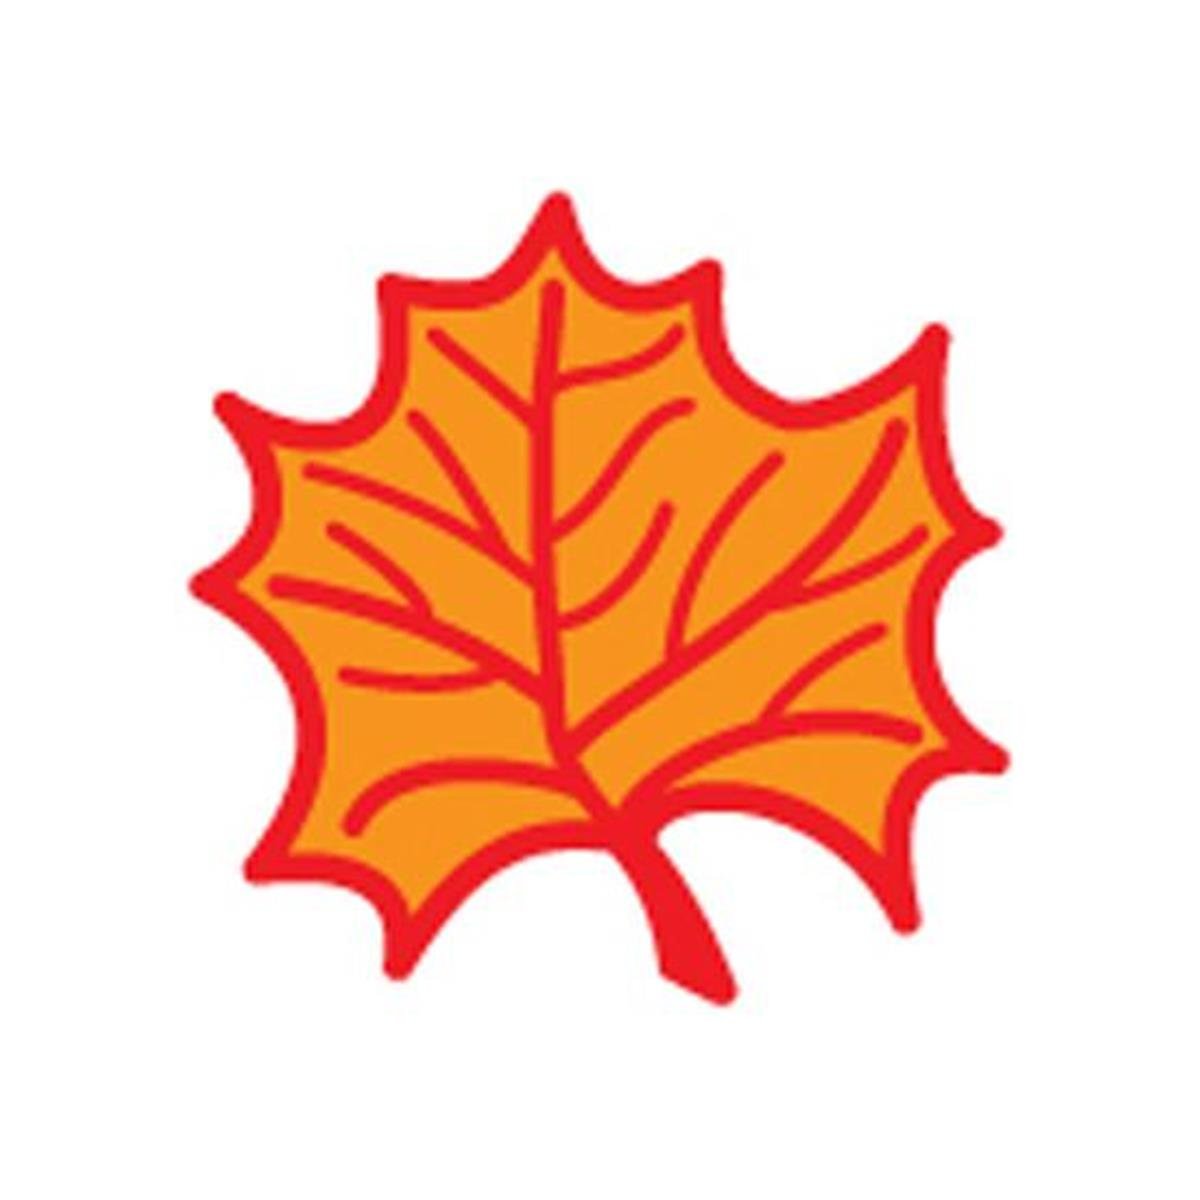 Se-0445 0.5 X 0.5 In. Incentive Stamp - Maple Leaf